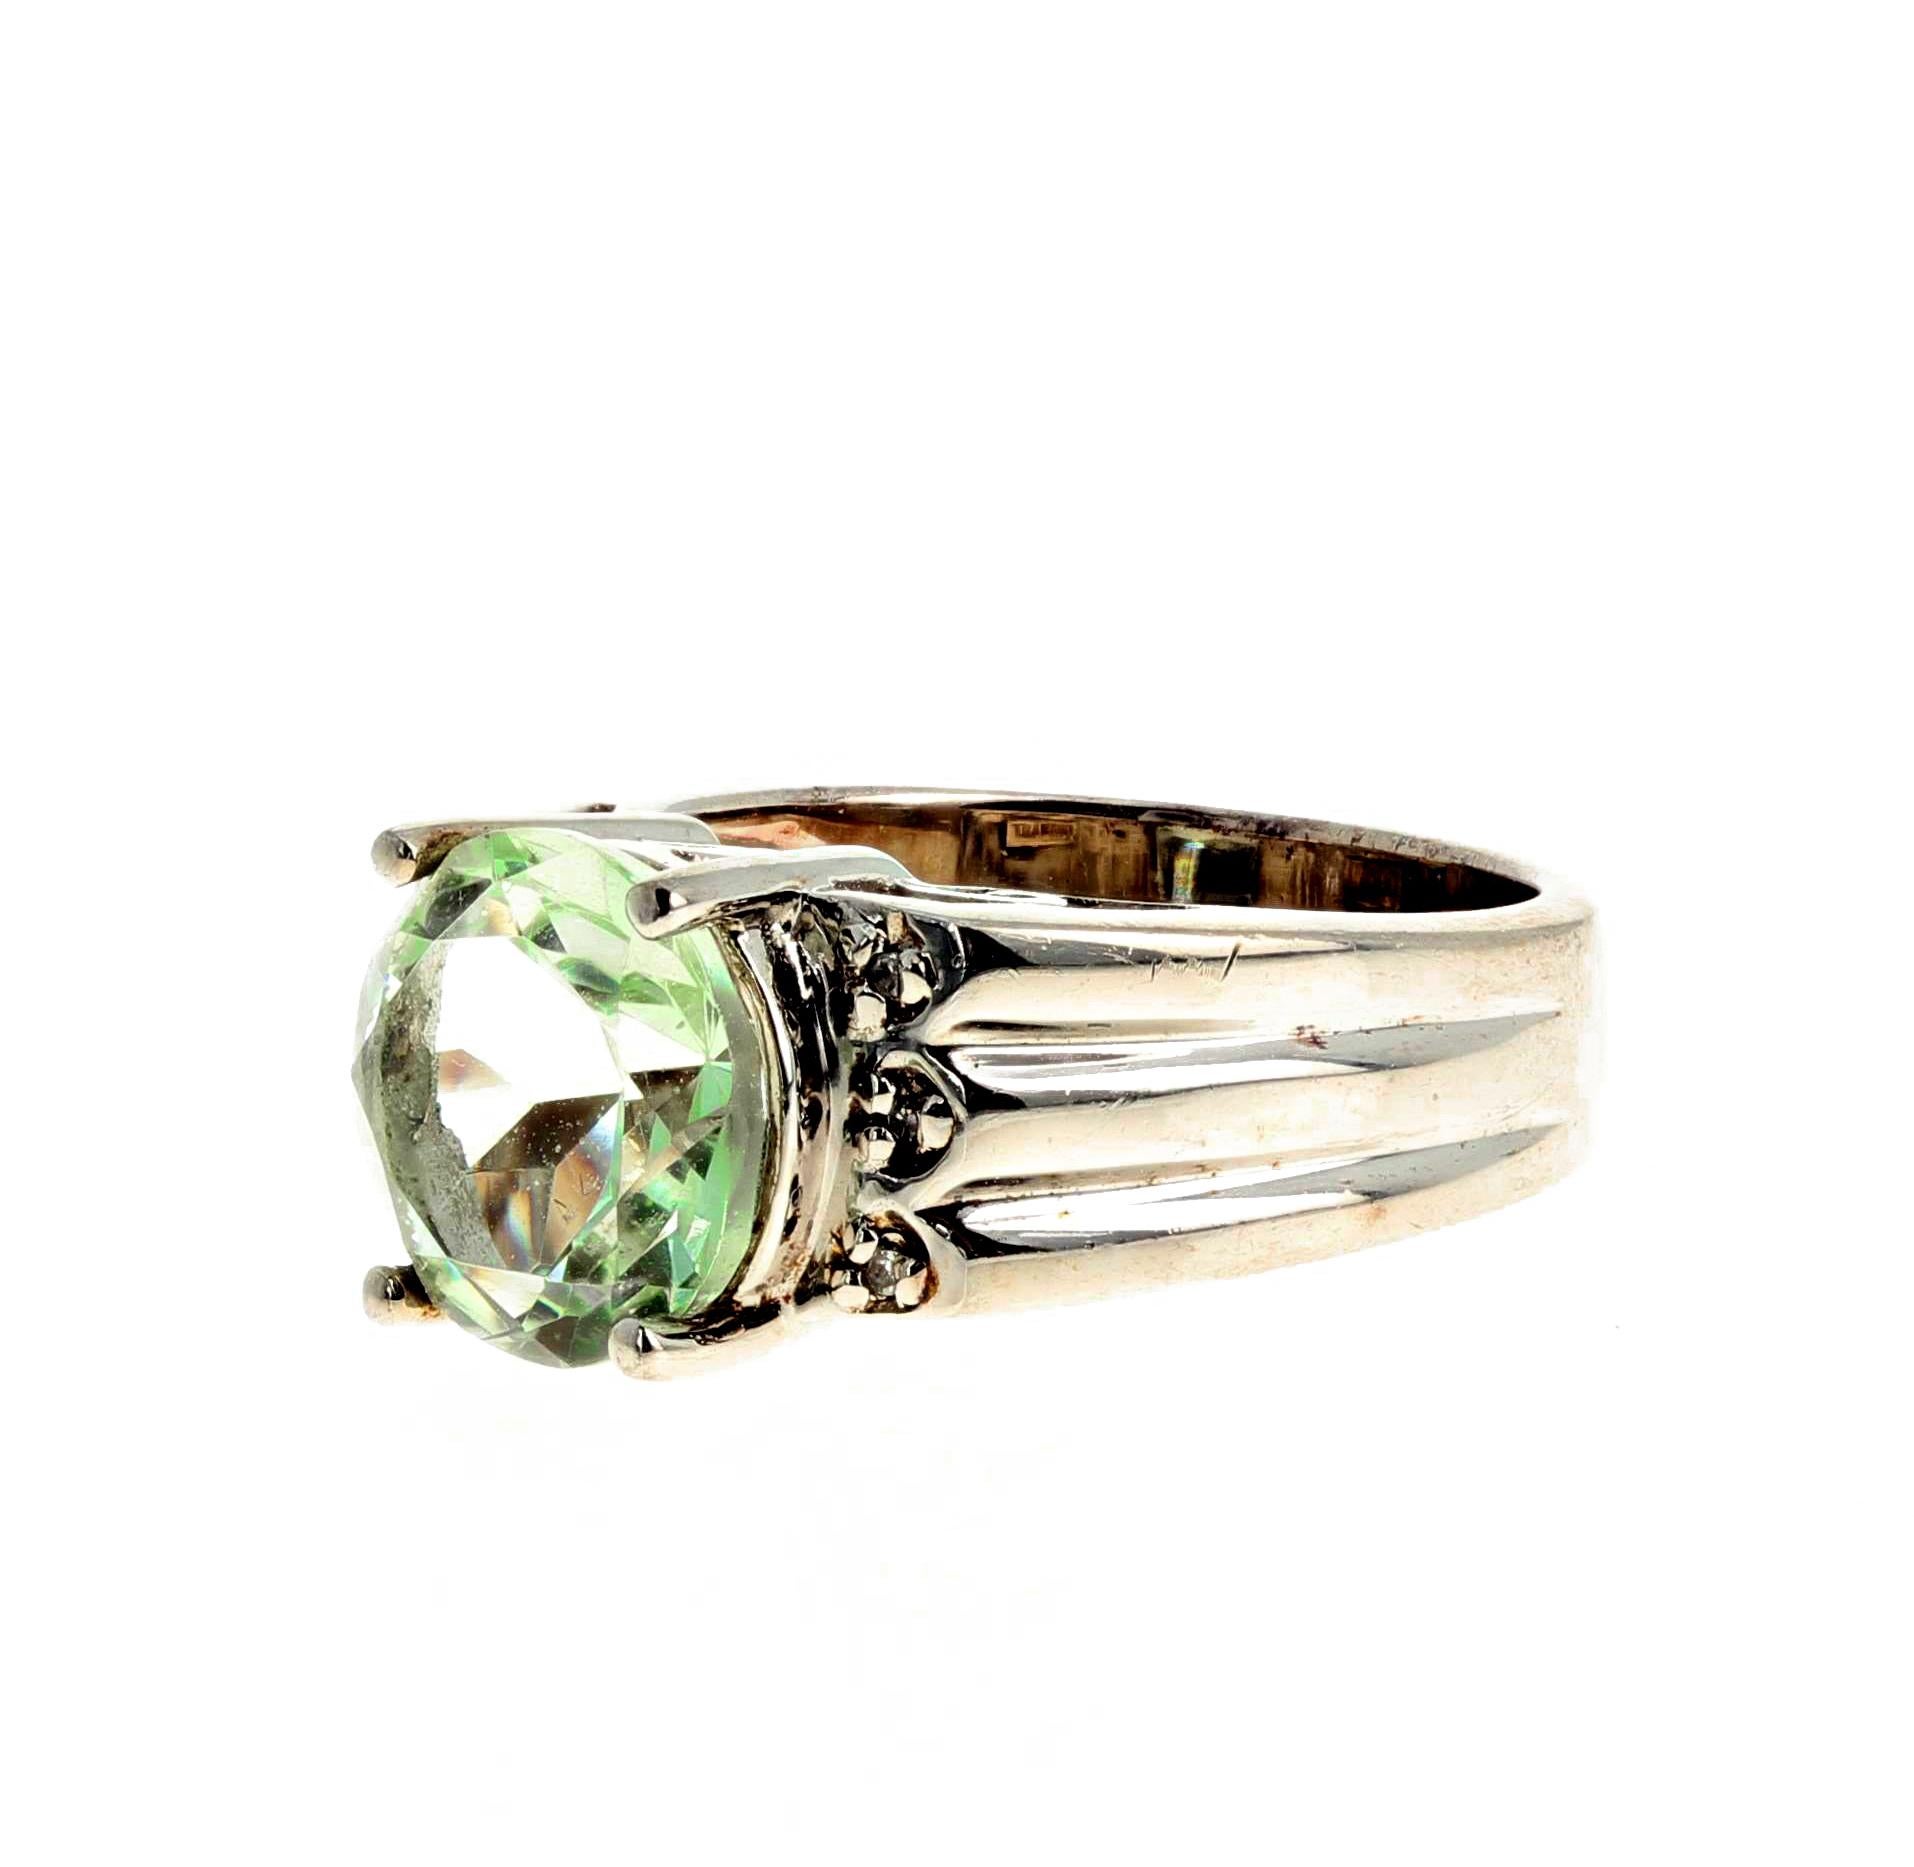 Round Cut Gemjunky Gorgeous 3 Cts Green Amethyst Topaz Sterling Silver Ring